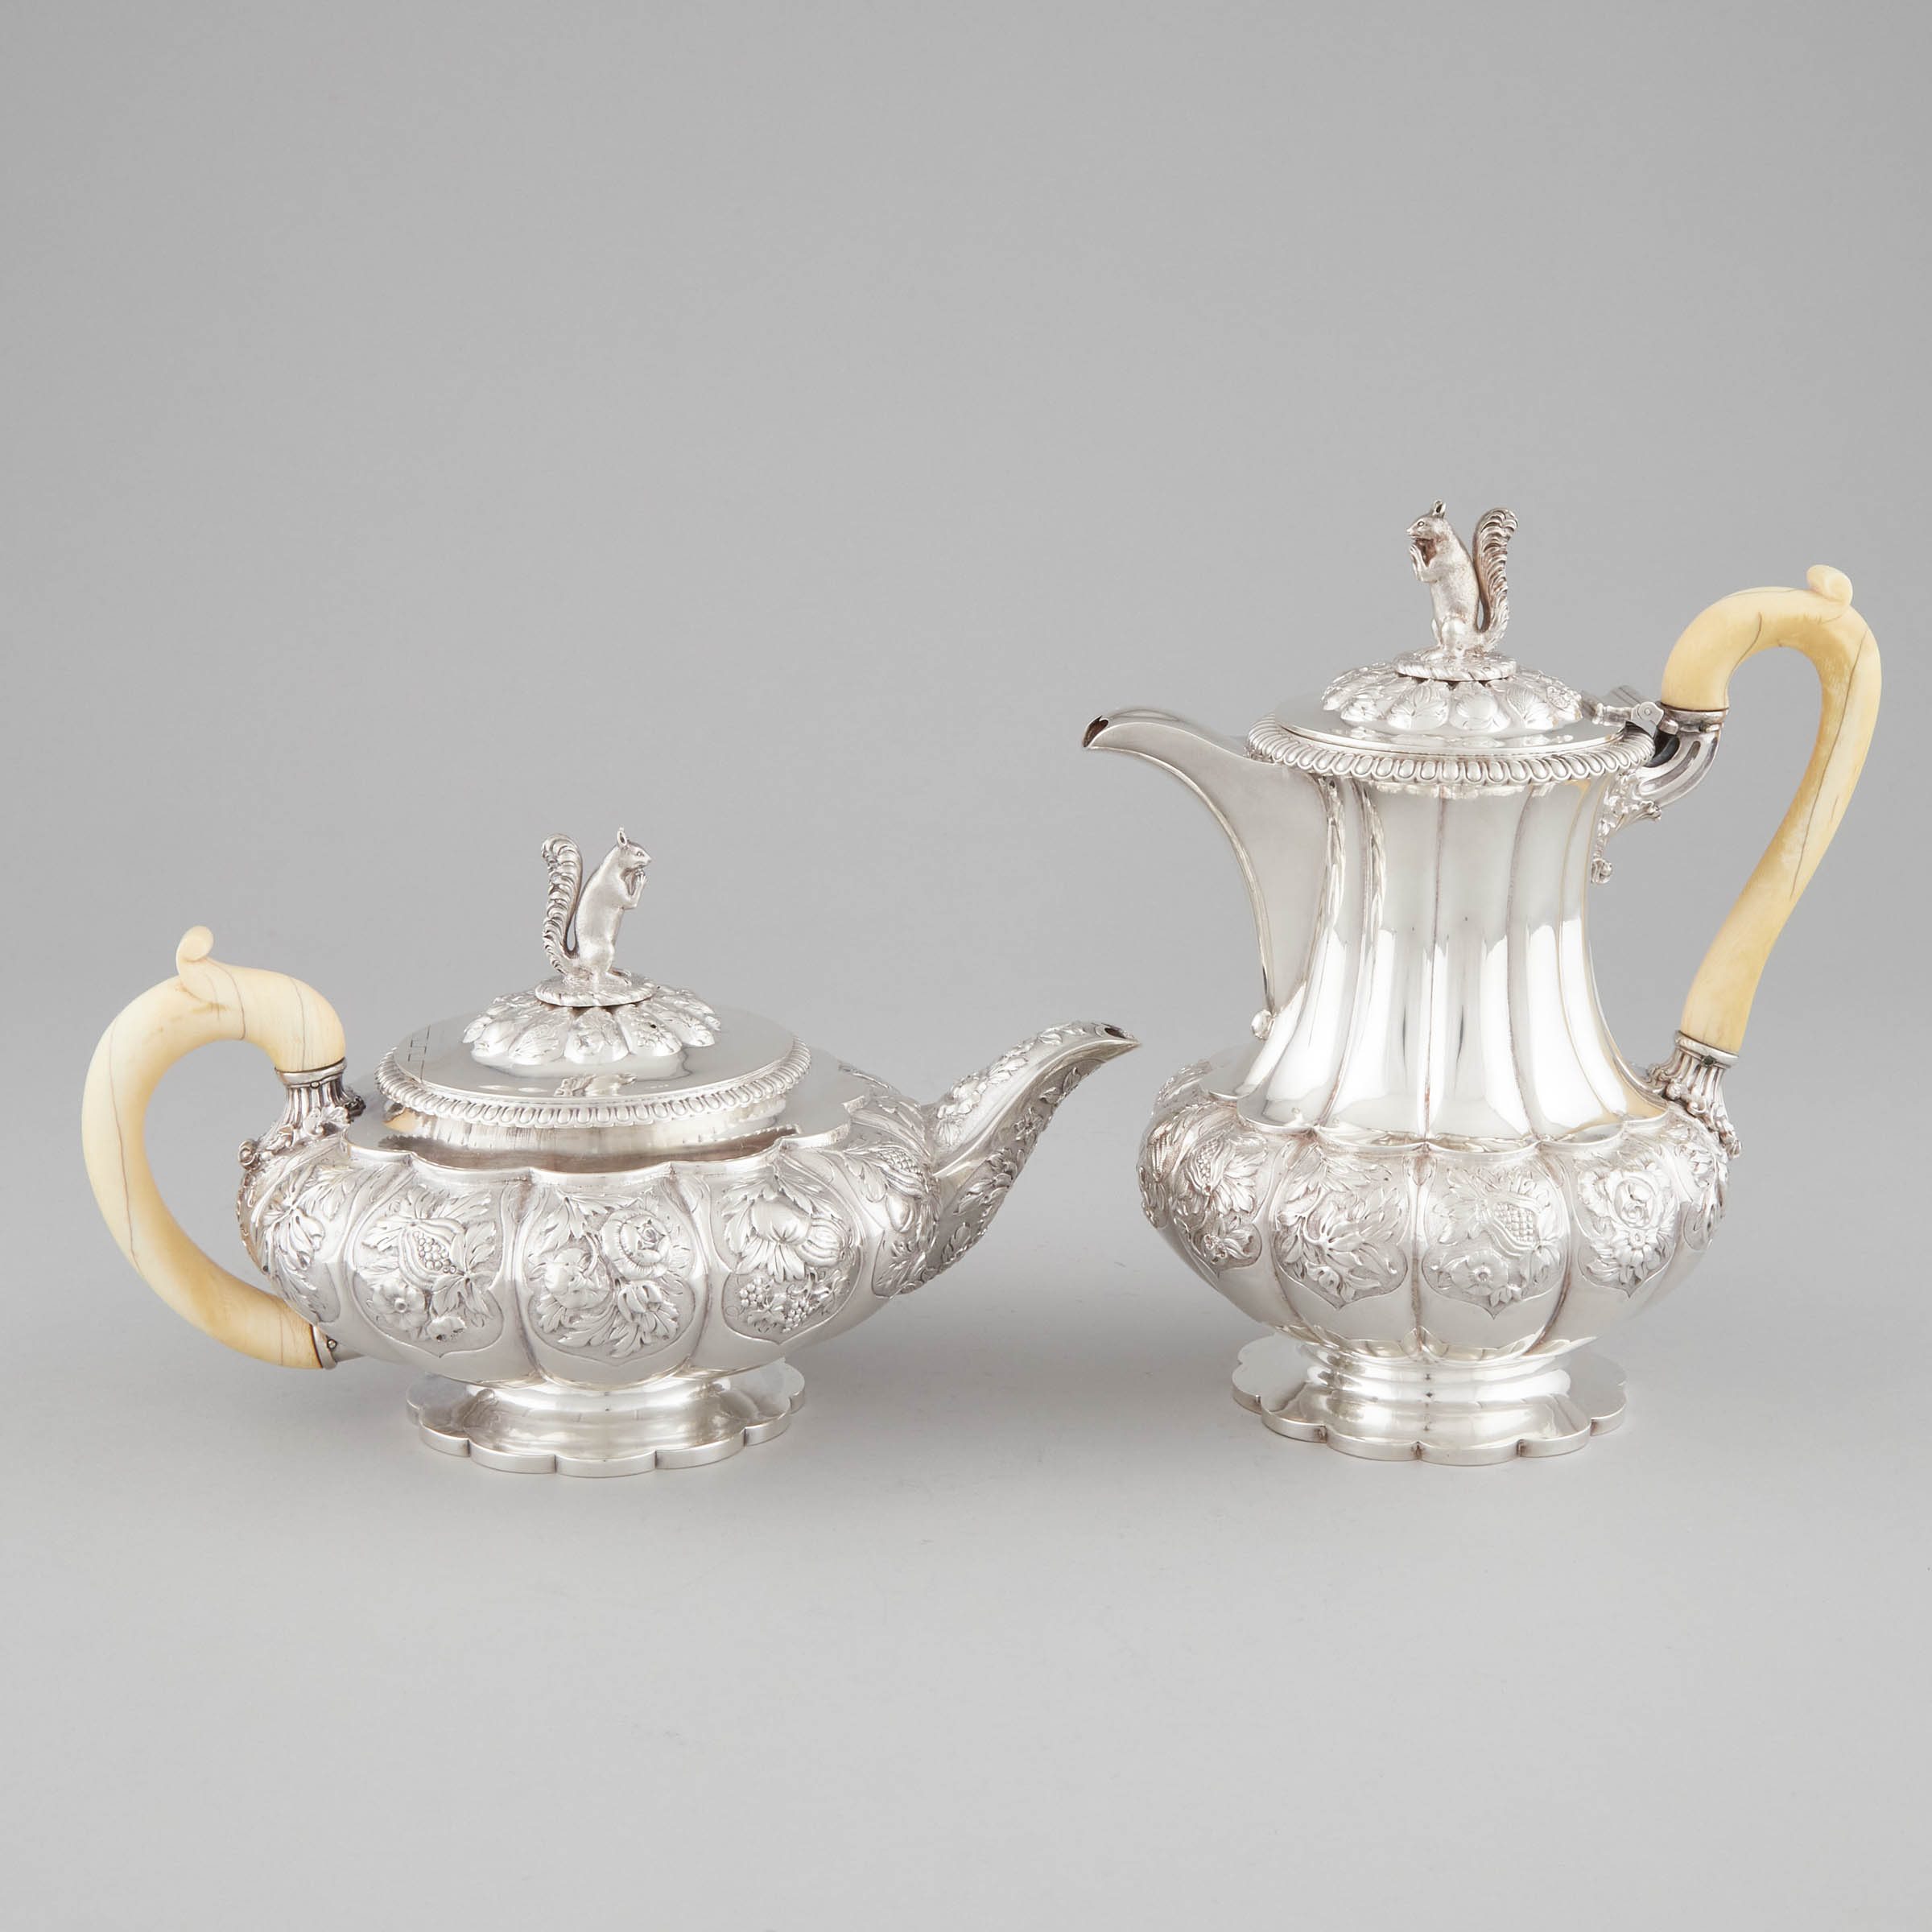 George IV Silver Teapot and Hot